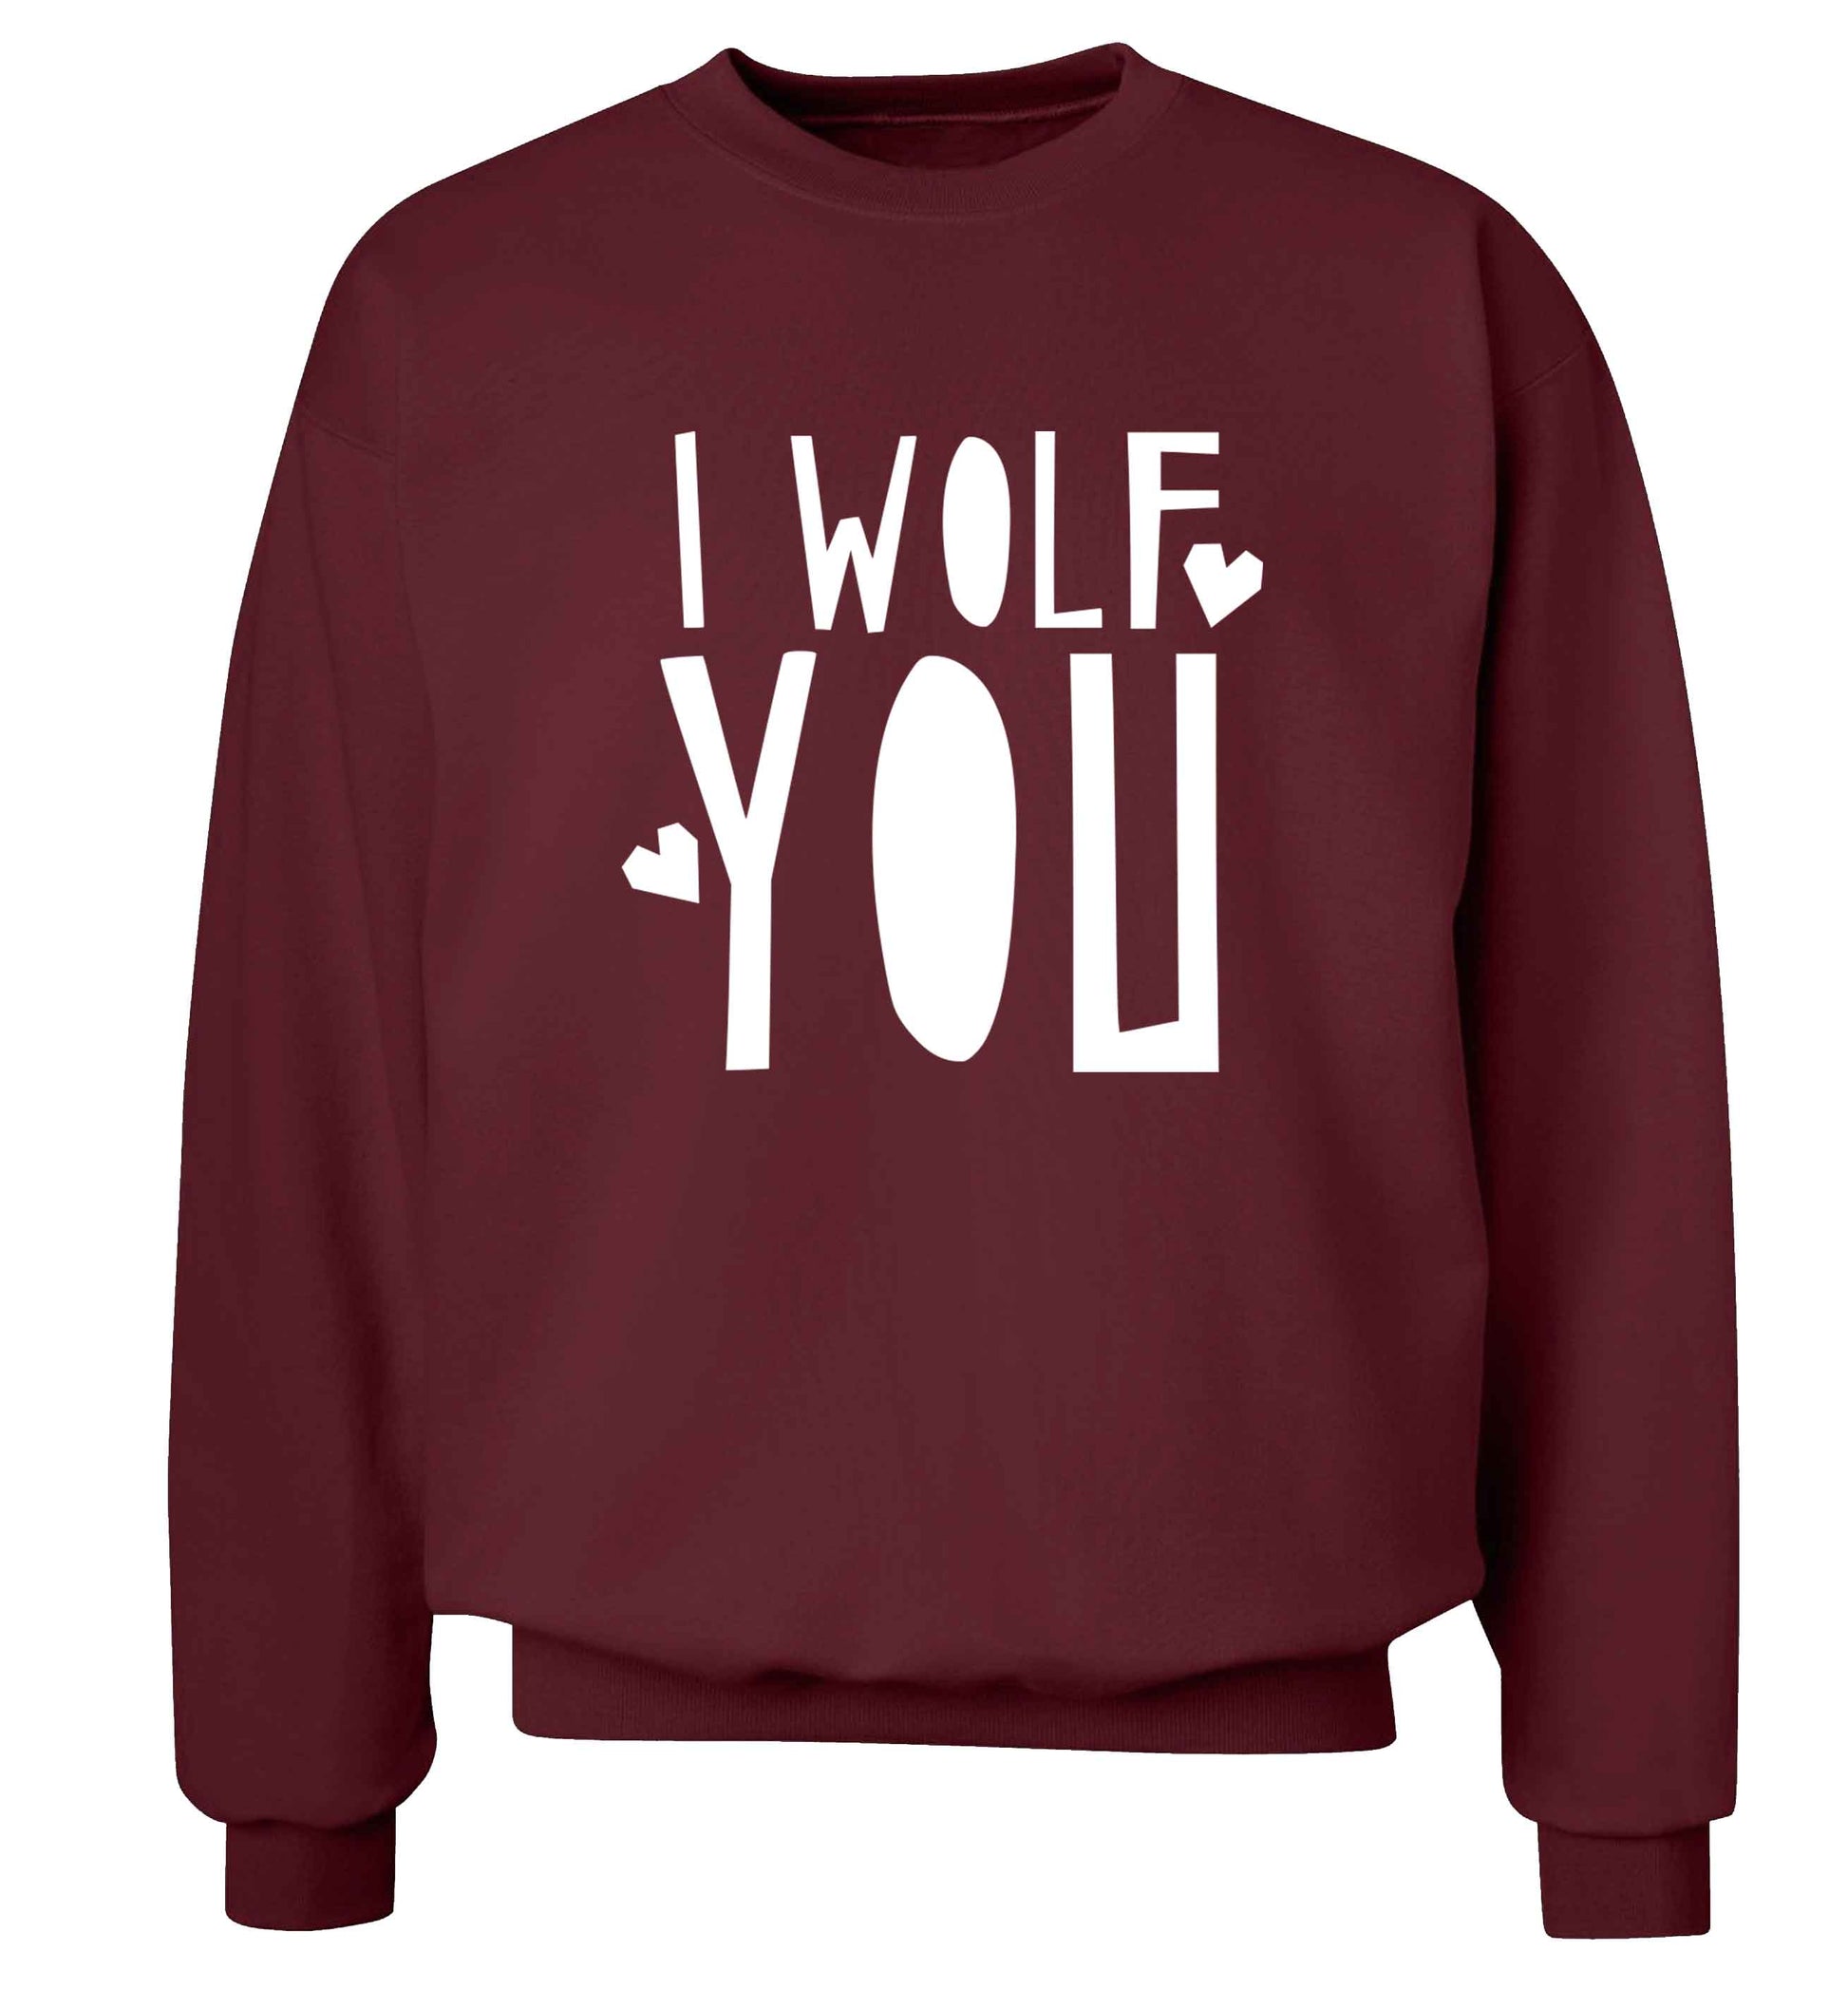 I wolf you adult's unisex maroon sweater 2XL